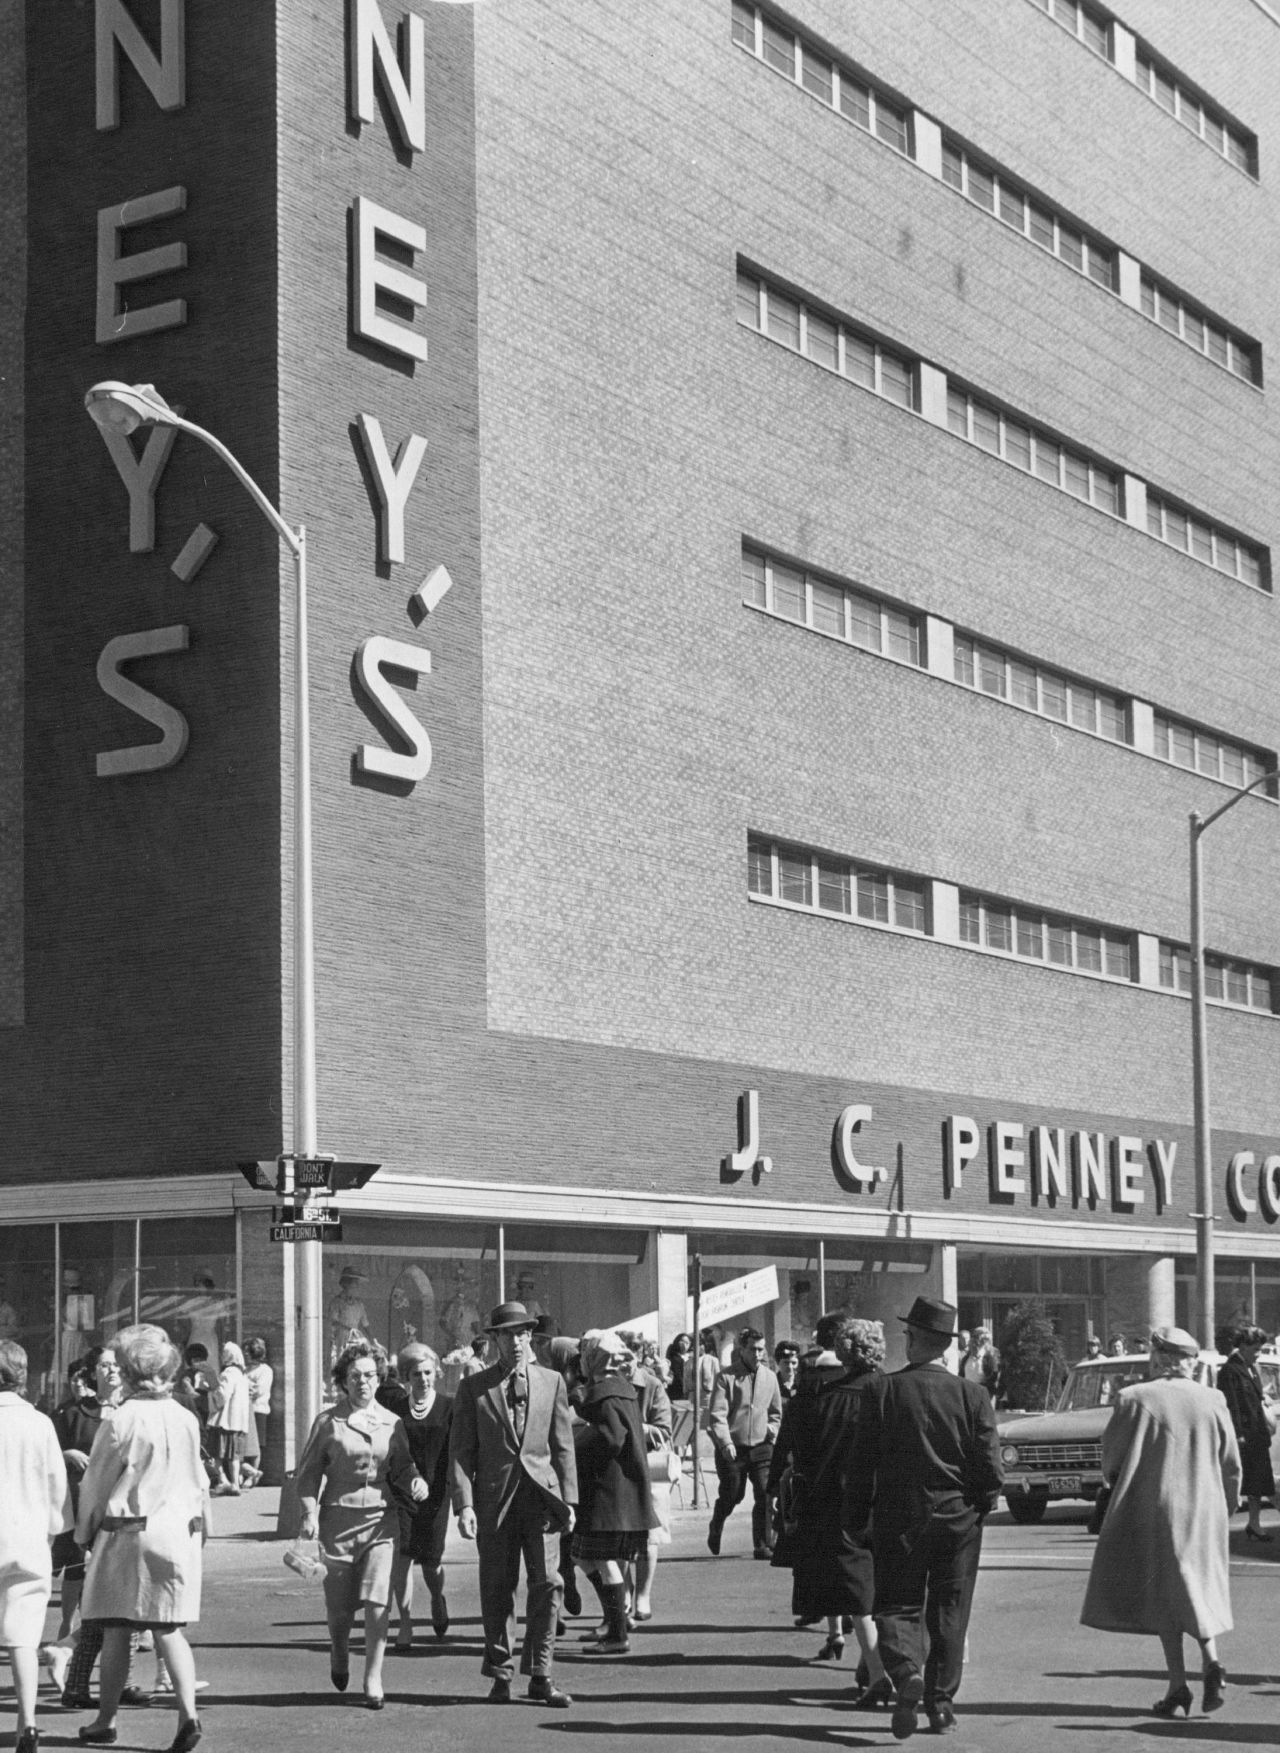 Shoppers hurry across an intersection in front of a JCPenney store in Denver in 1964.